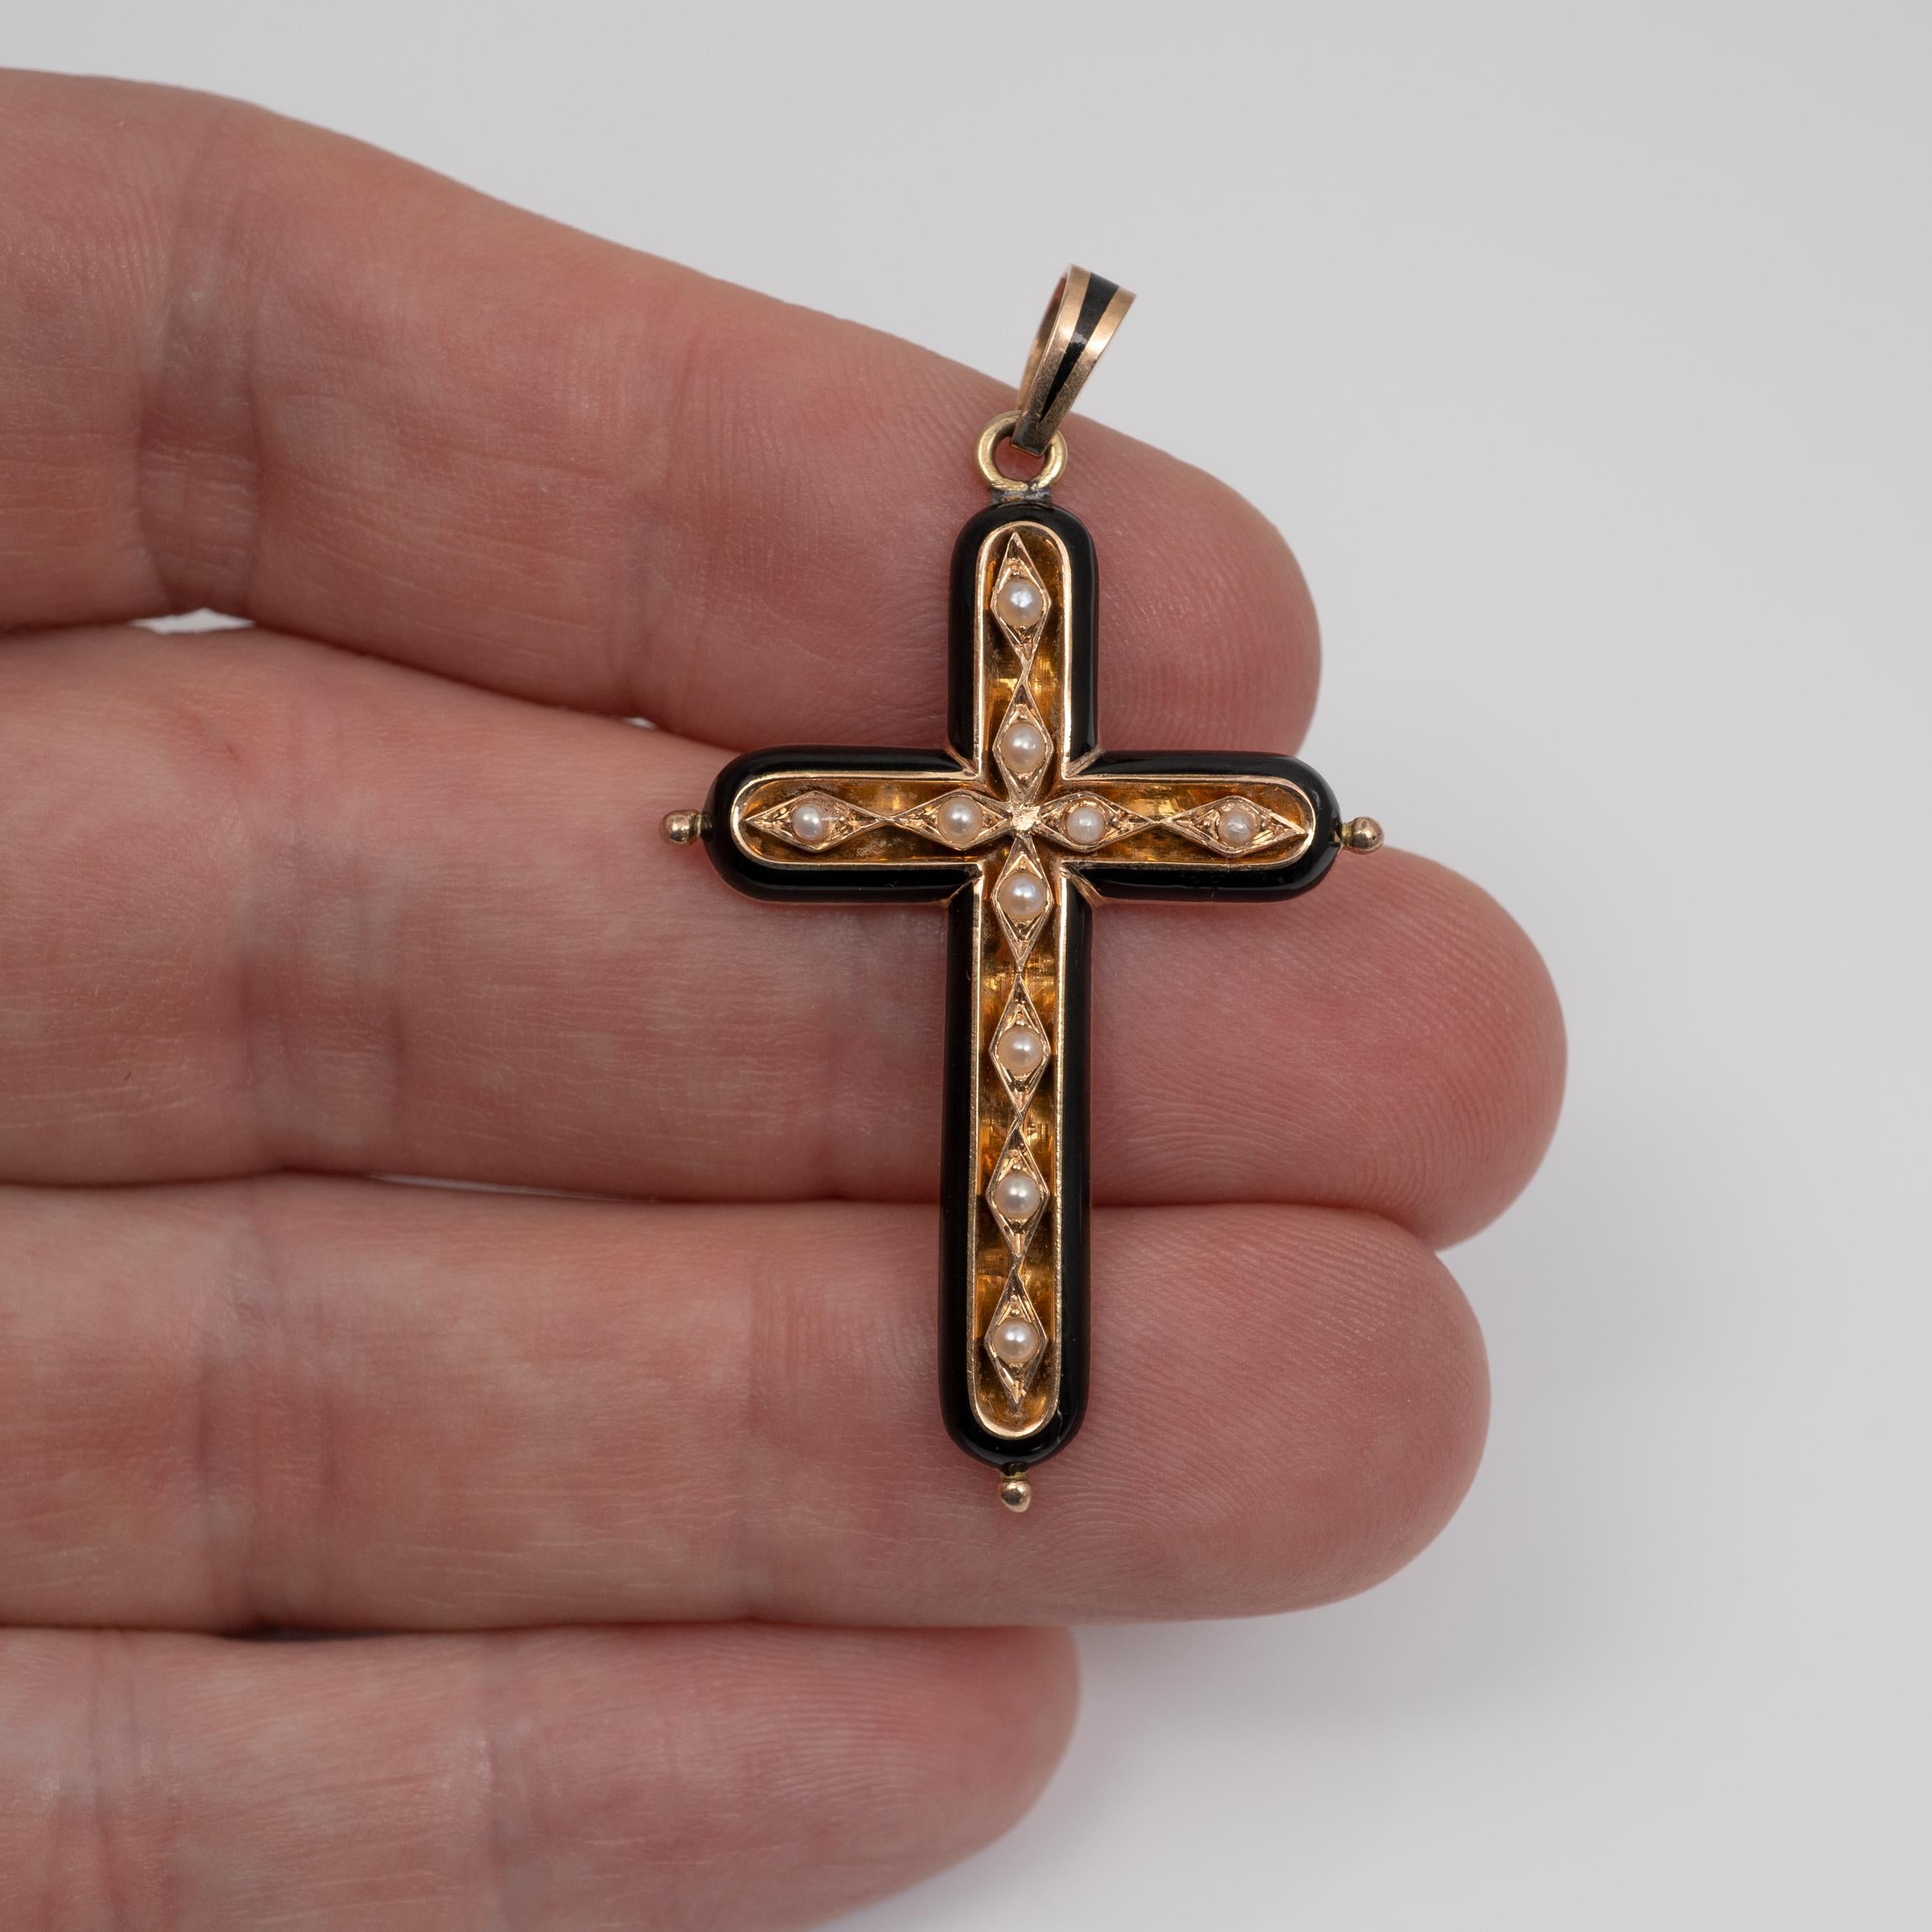 A quality antique mourning cross pendant made in 18 karat rose gold, enamel and pearl detail. Circa 1900 France

The quality piece has faint marks to the ring bale and we have tested to confirm 18 karat gold quality.

A nicely made piece coming from